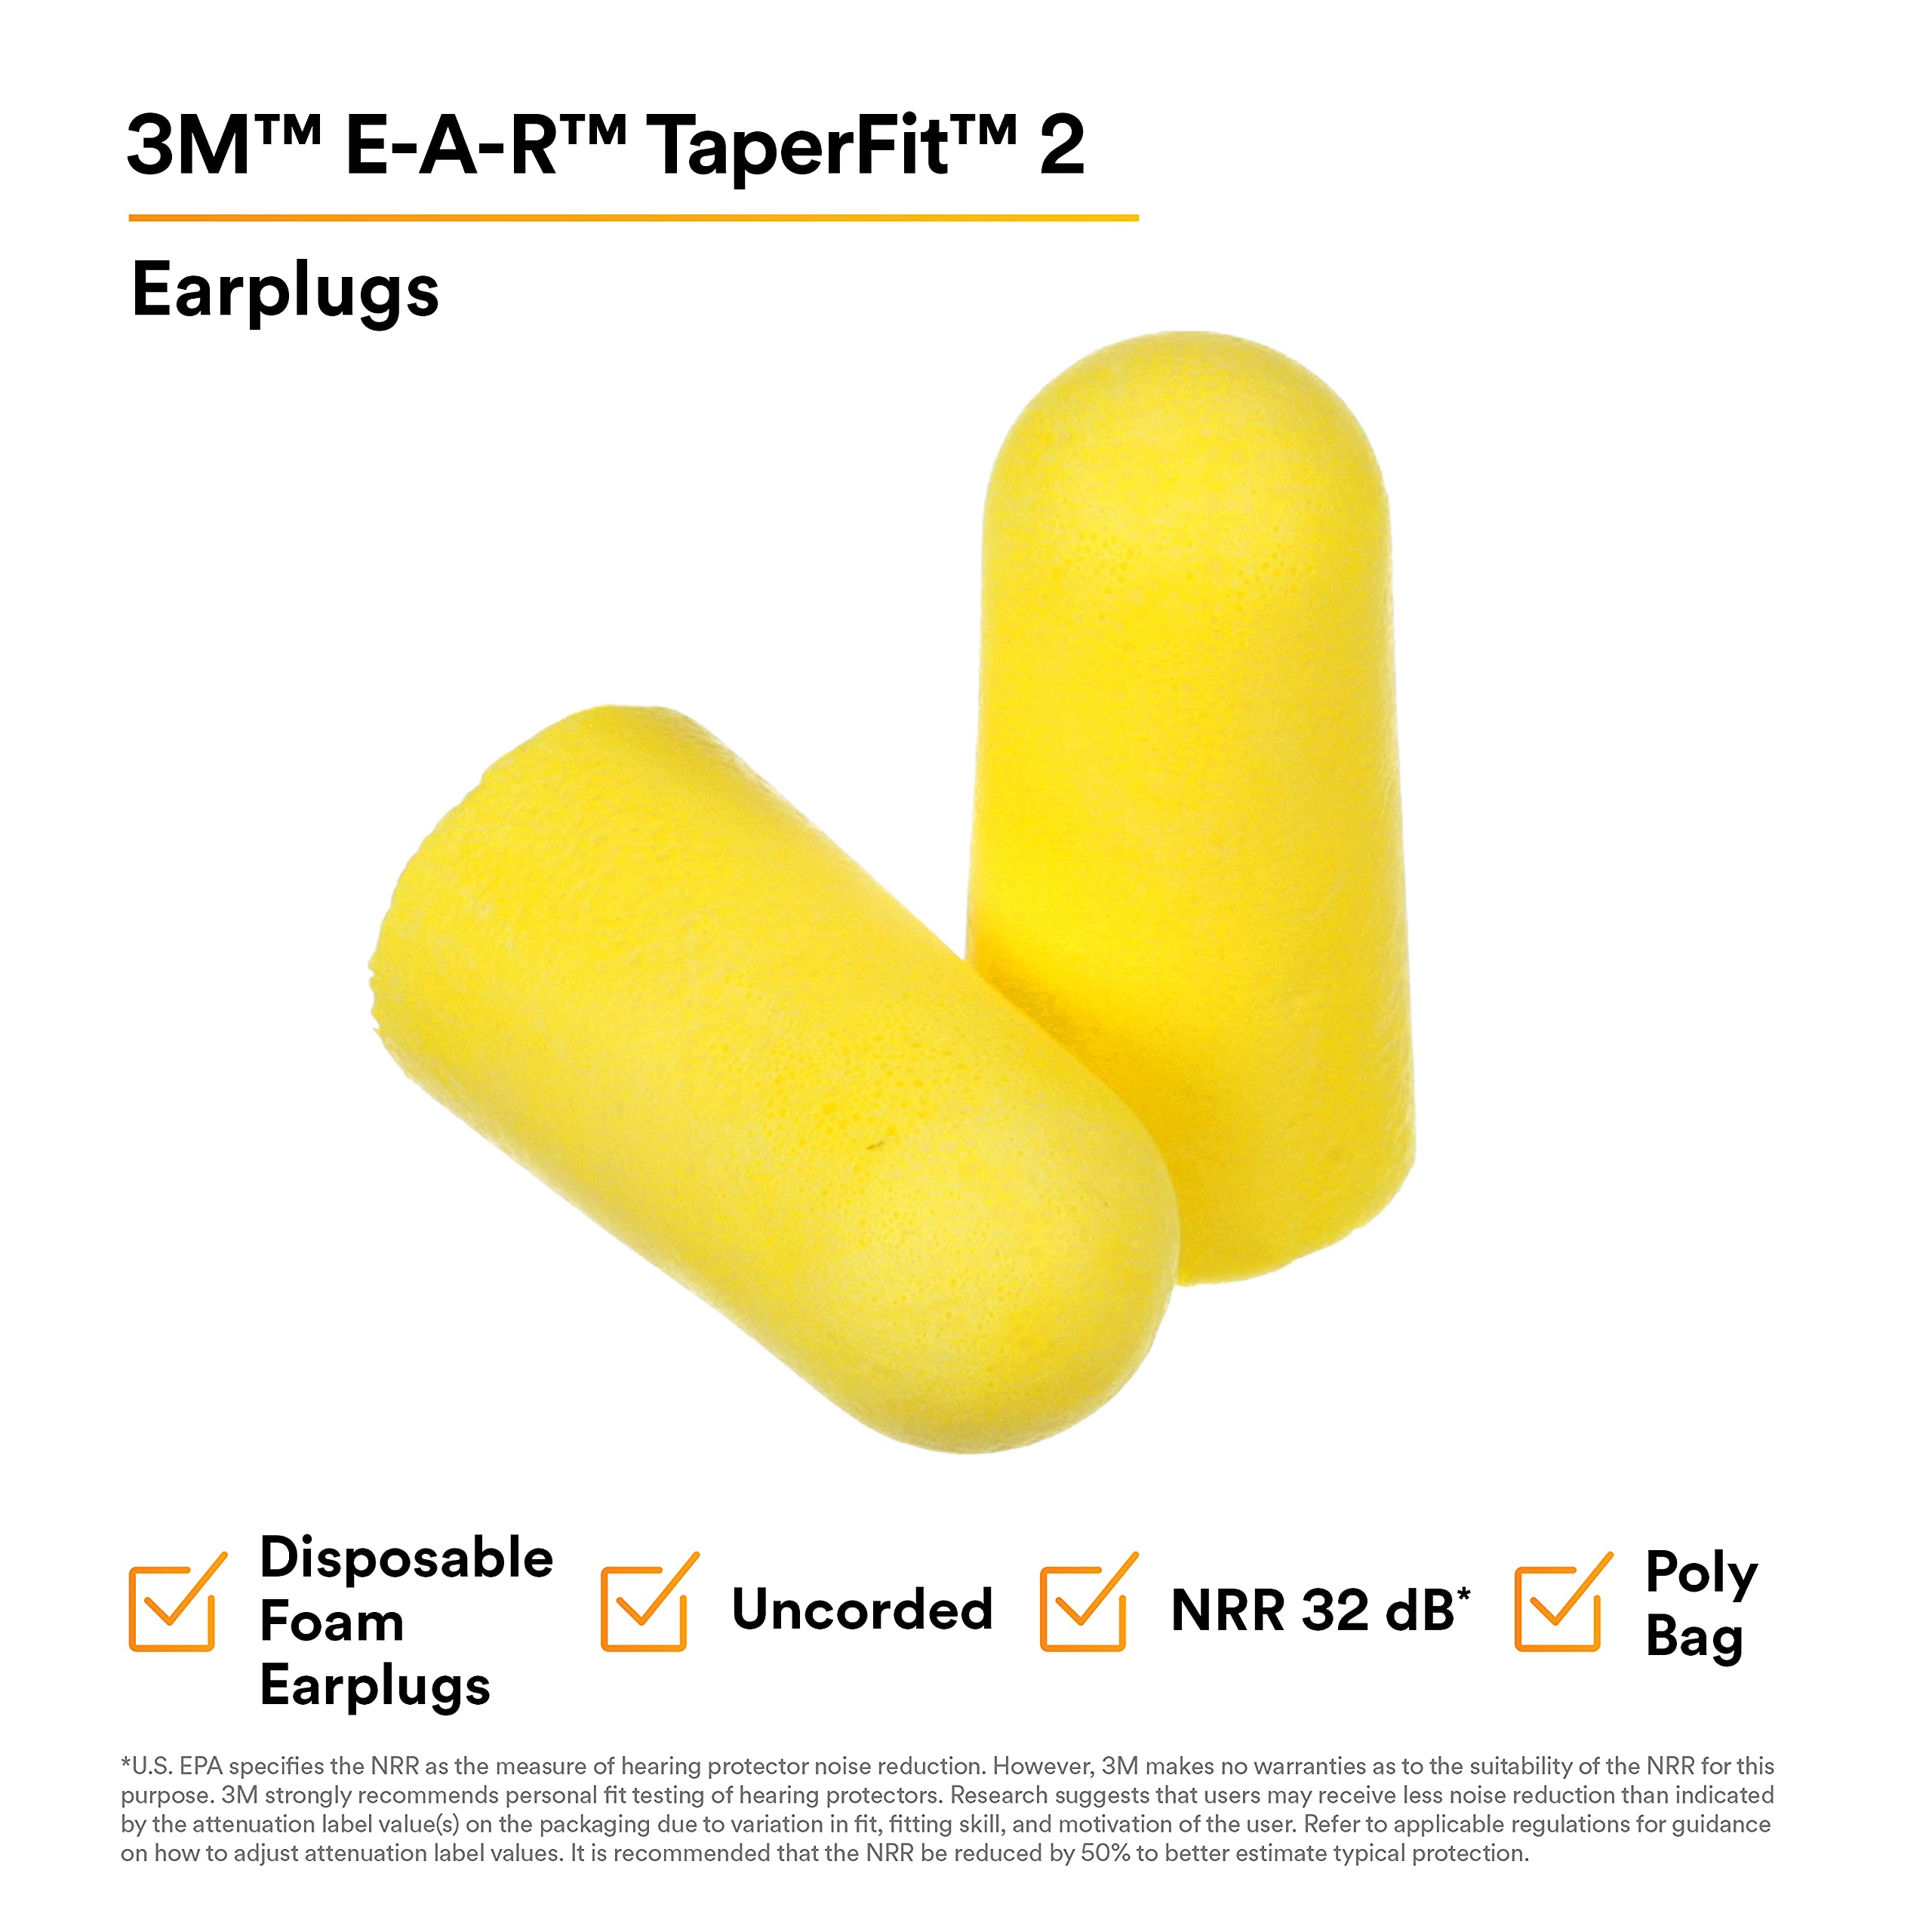 3M Ear Plugs, 200/Box, E-A-R TaperFit2 312-1219, Uncorded, Disposable, Foam, NRR 32, For Drilling, Grinding, Machining, Sawing, Sanding, Welding, 1 Pair/Poly Bag,Yellow